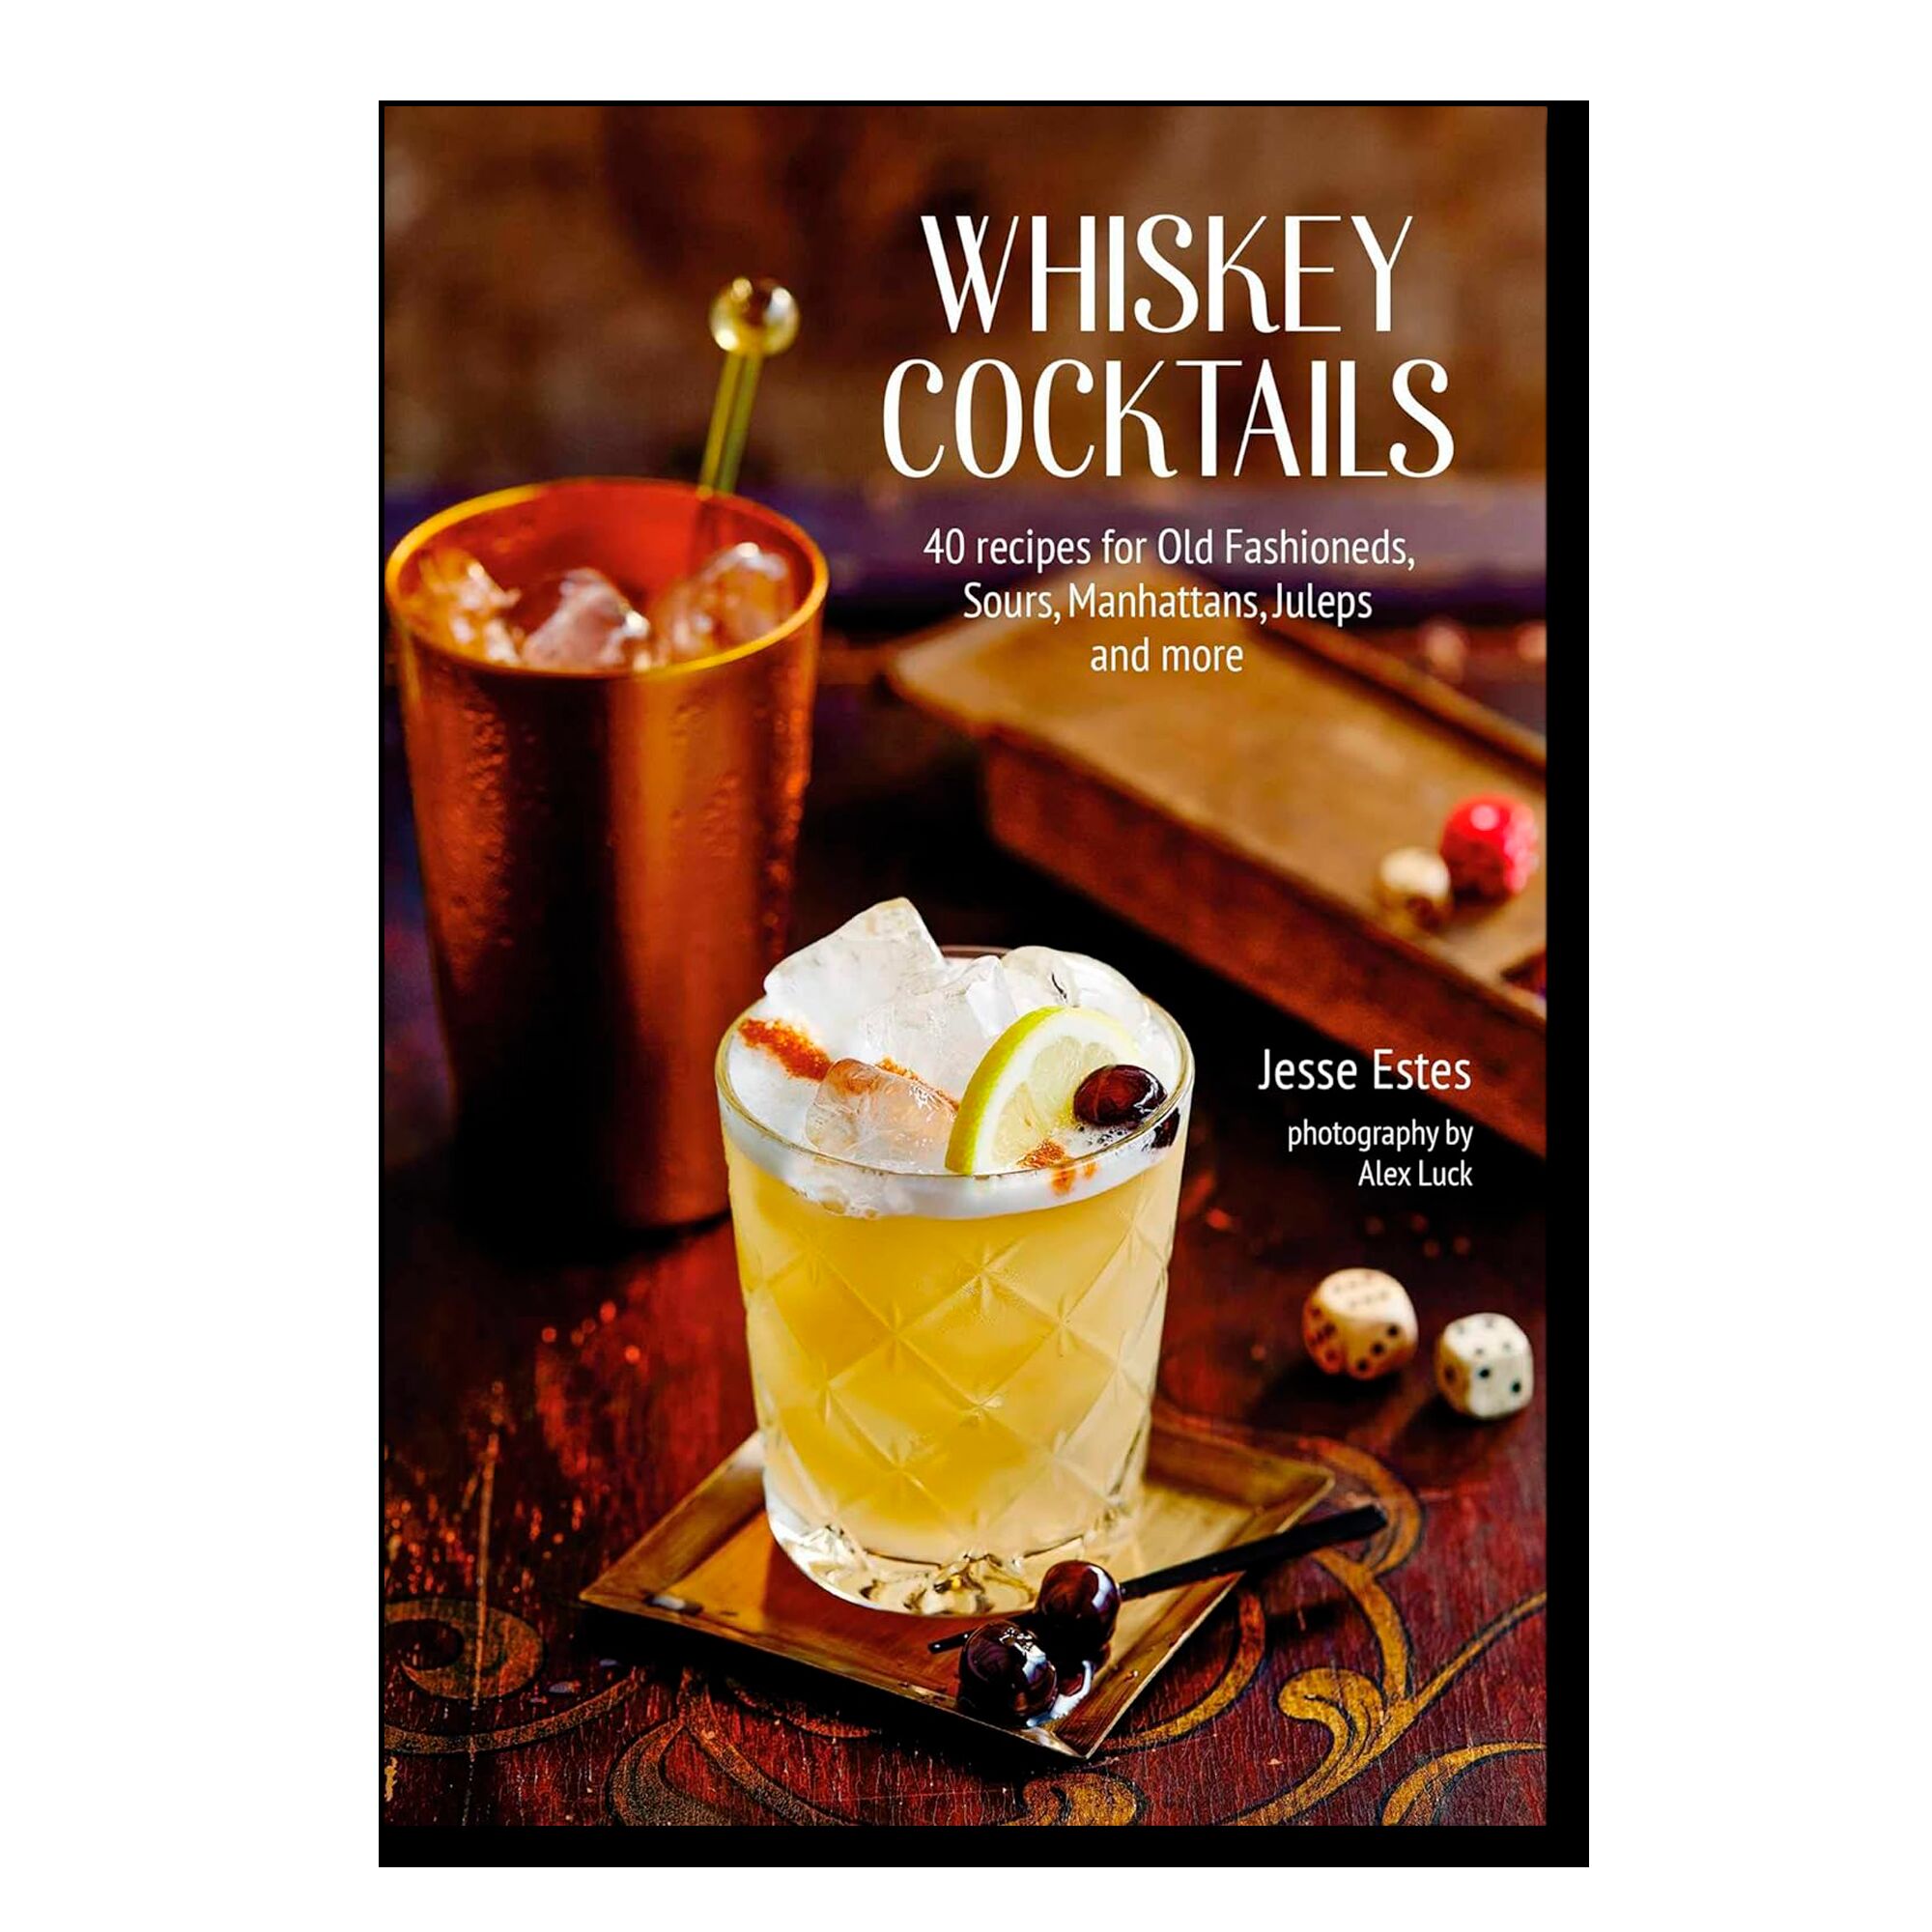 Whiskey Cocktails: 40 recipes for Old Fashioneds, Sours, Manhattans, Juleps and more